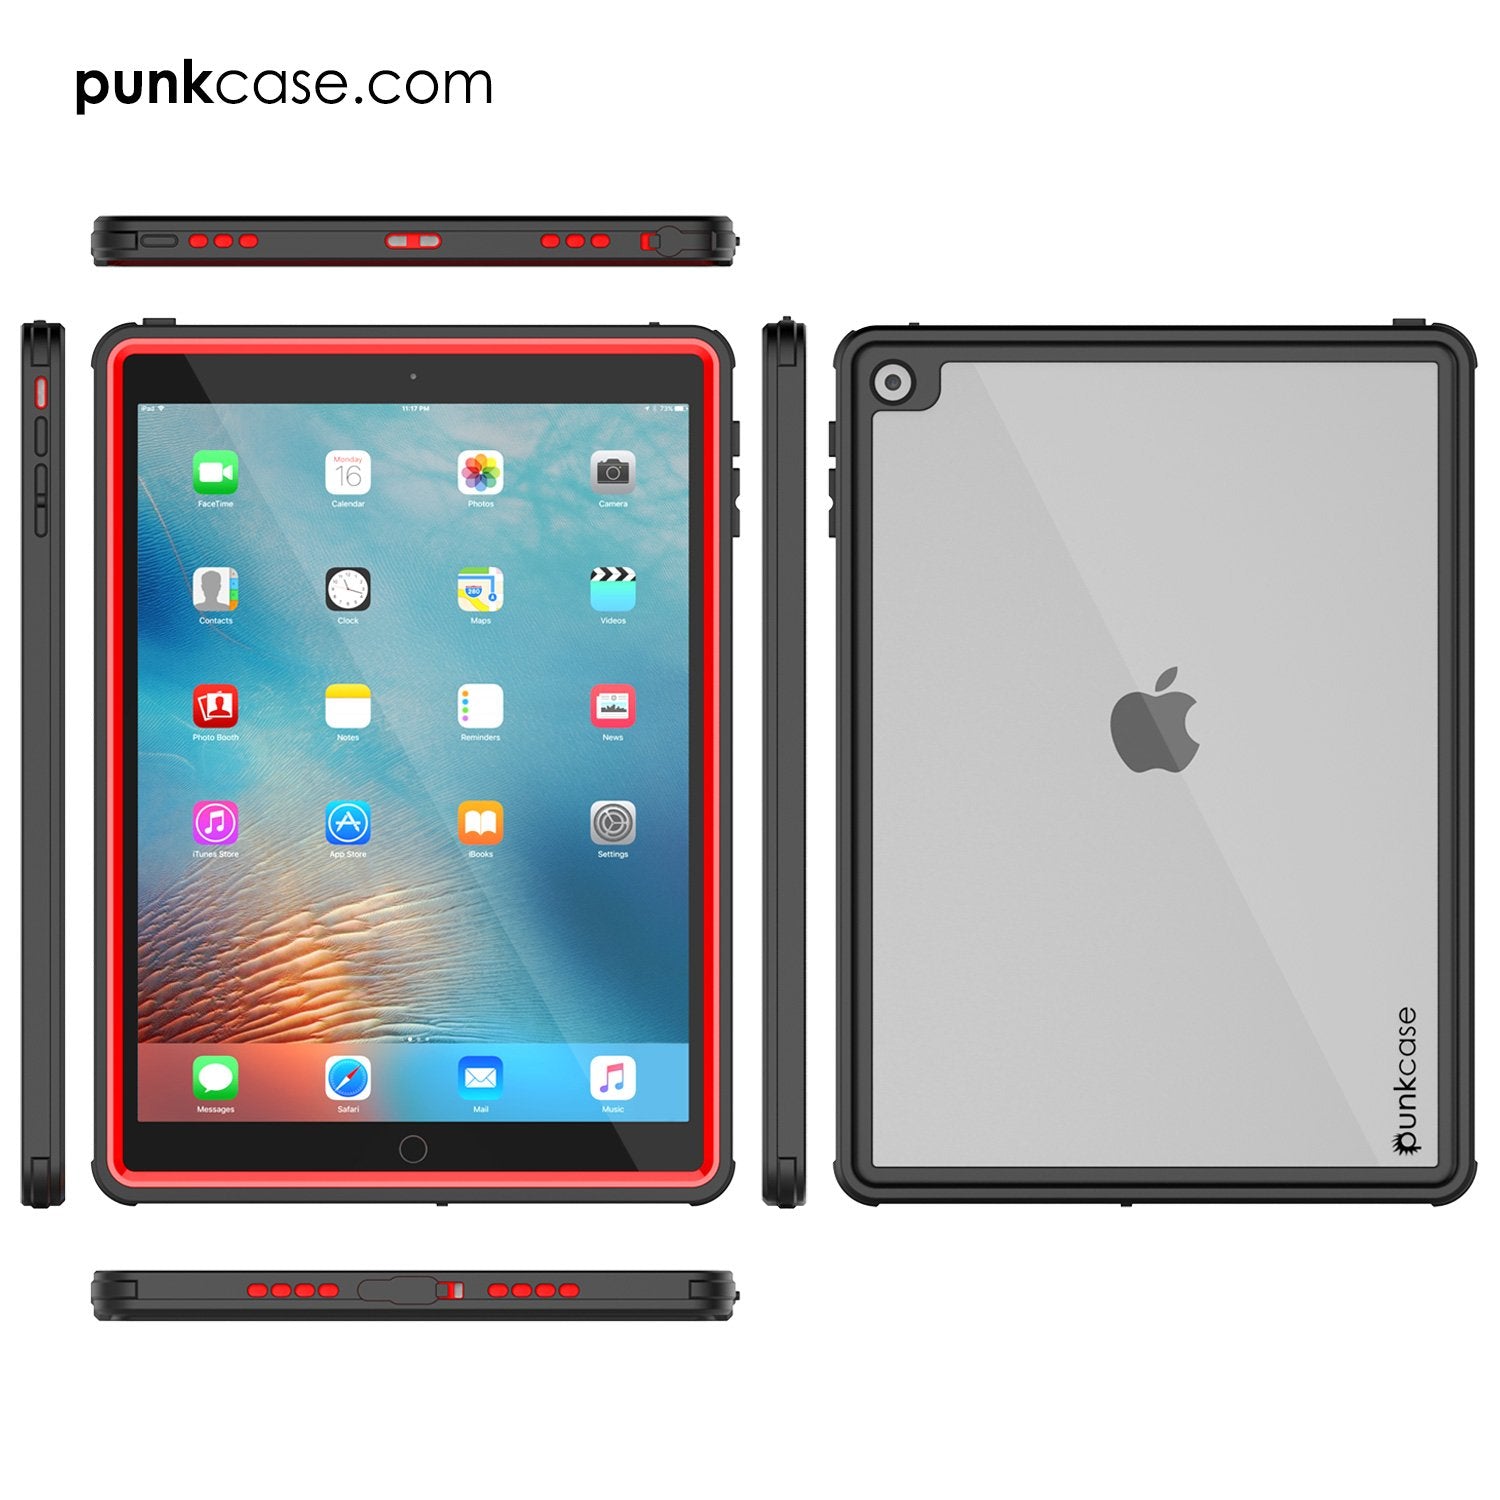 Punkcase iPad Pro 9.7 Case [CRYSTAL Series], Waterproof, Ultra-Thin Cover [Shockproof] [Dustproof] with Built-in Screen Protector [Red]